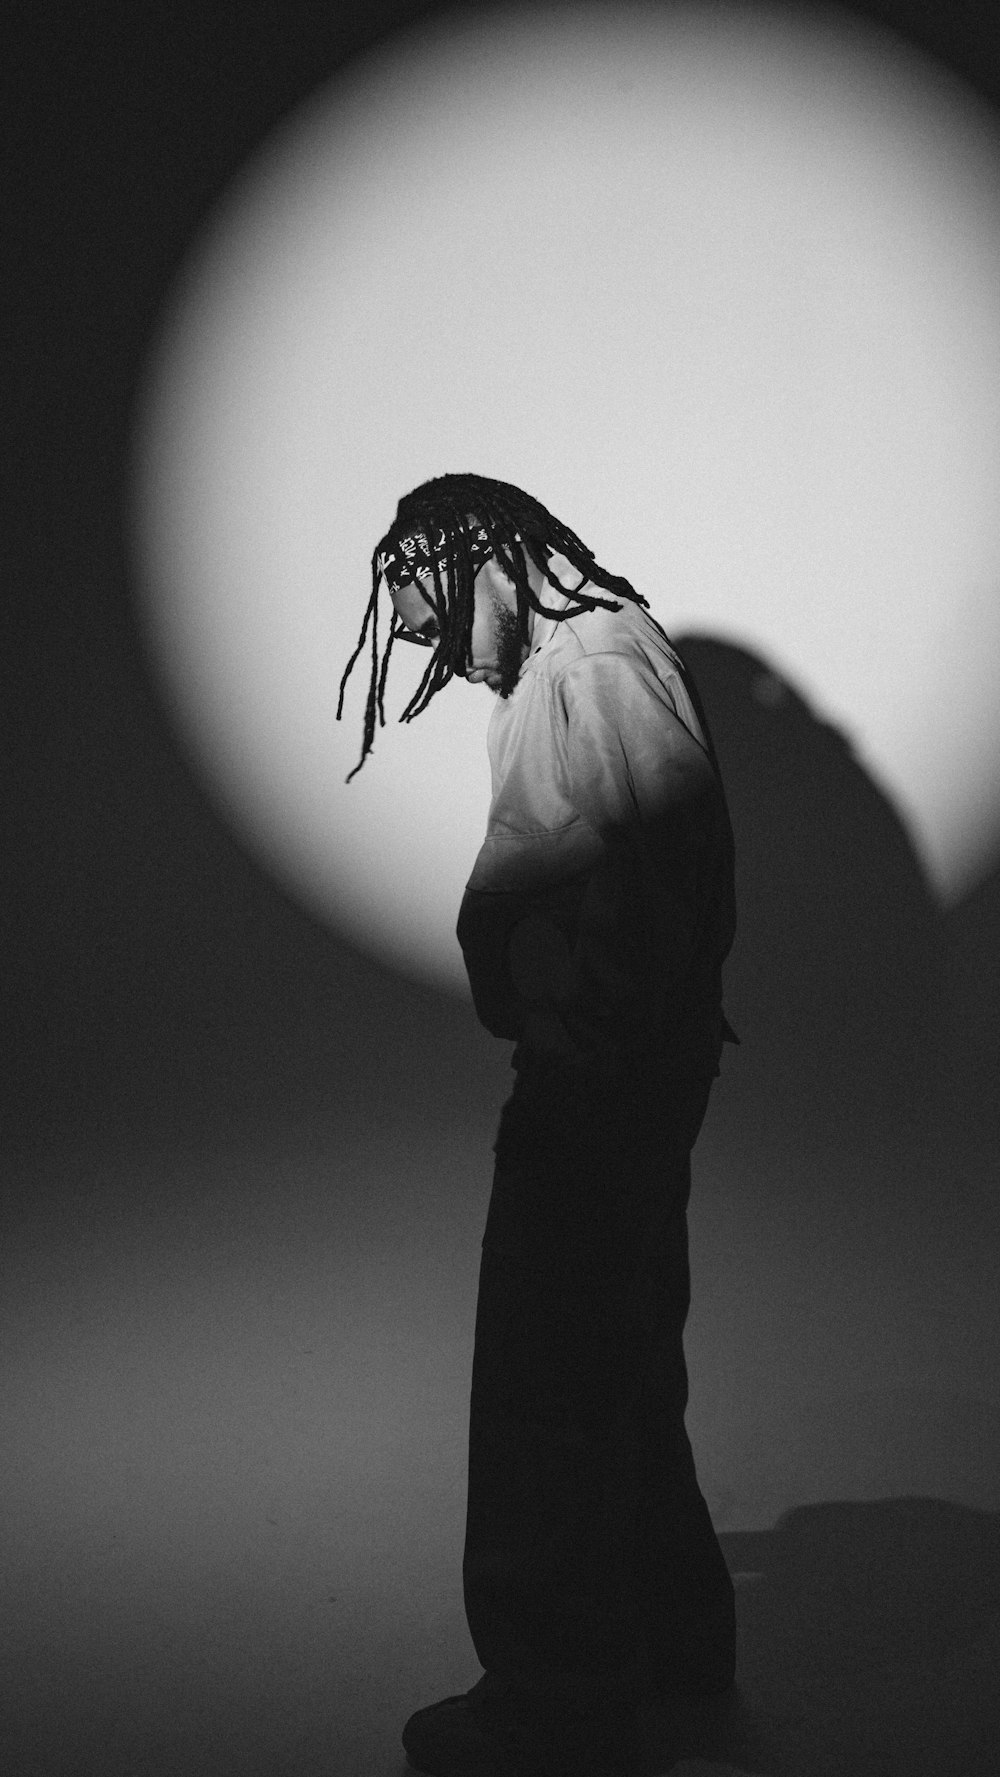 a man with dreadlocks standing in front of a sun